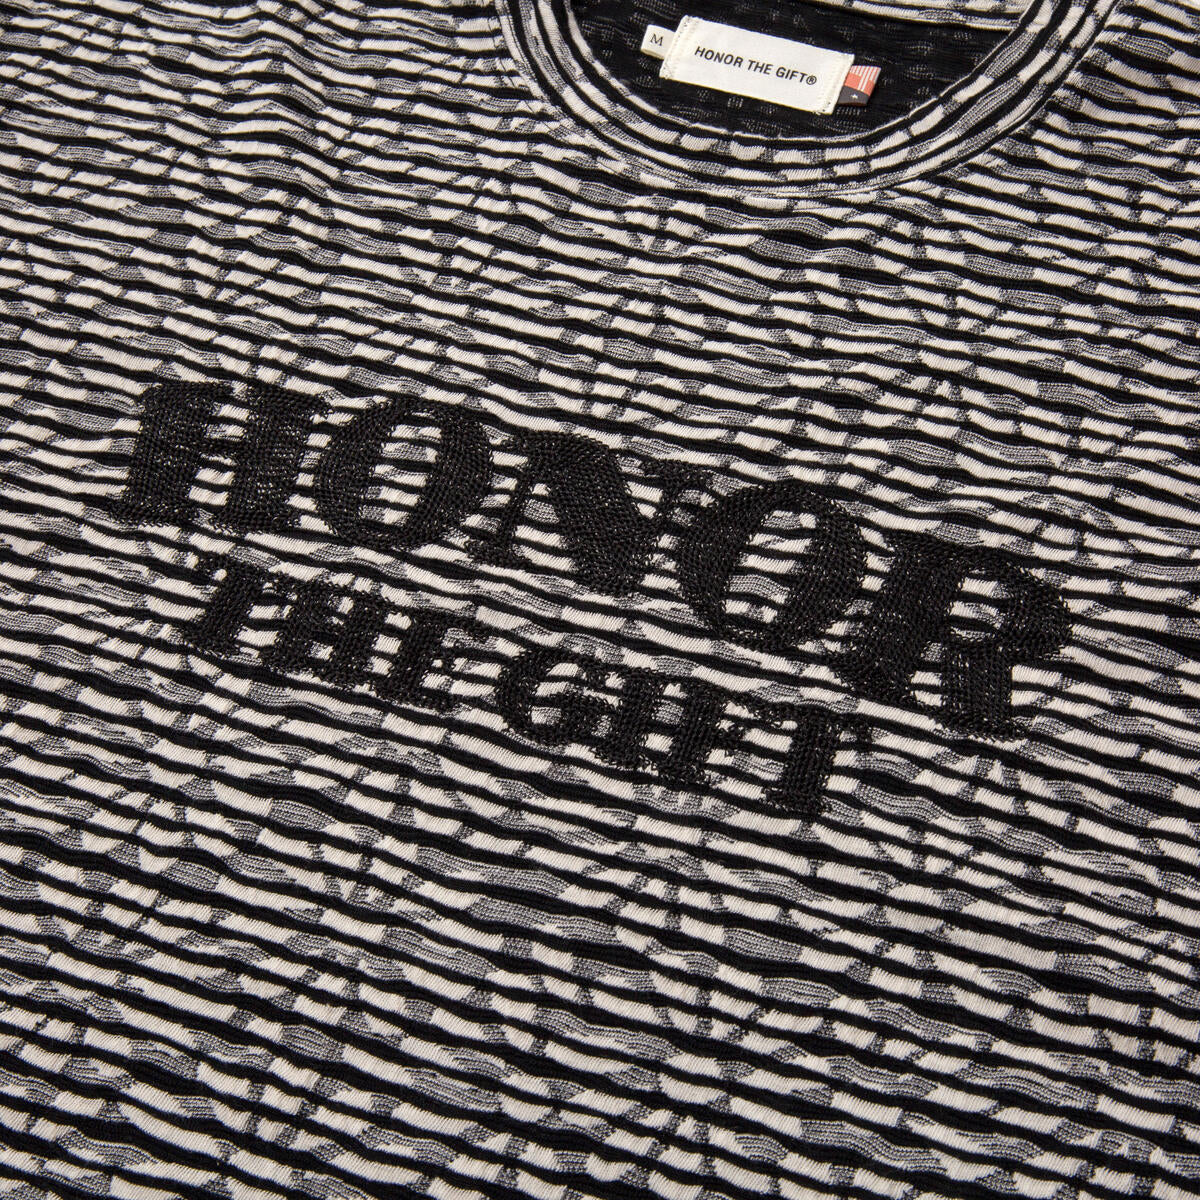 Honor The Gift A-sping Stripe Box Tee- BLACK